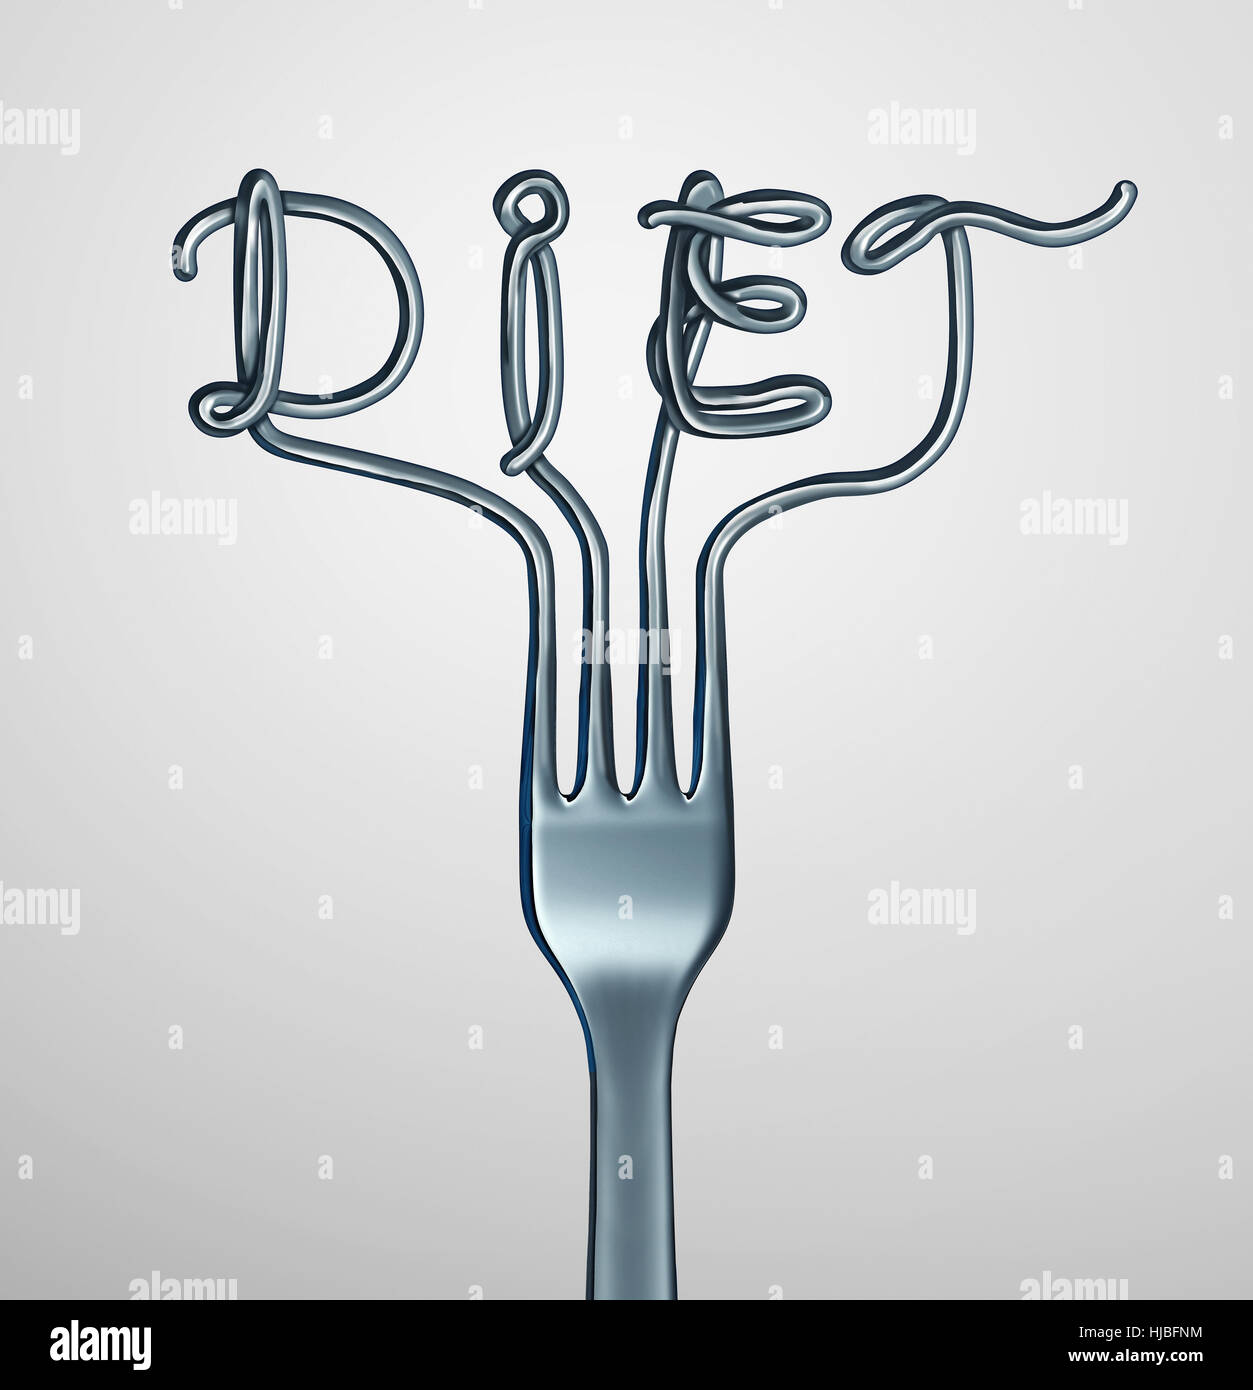 Diet fork symbol as dinner utensil shaped as text representing dieting and nutrition or anorexia and bulimia eating disorder as a 3D illustration. Stock Photo